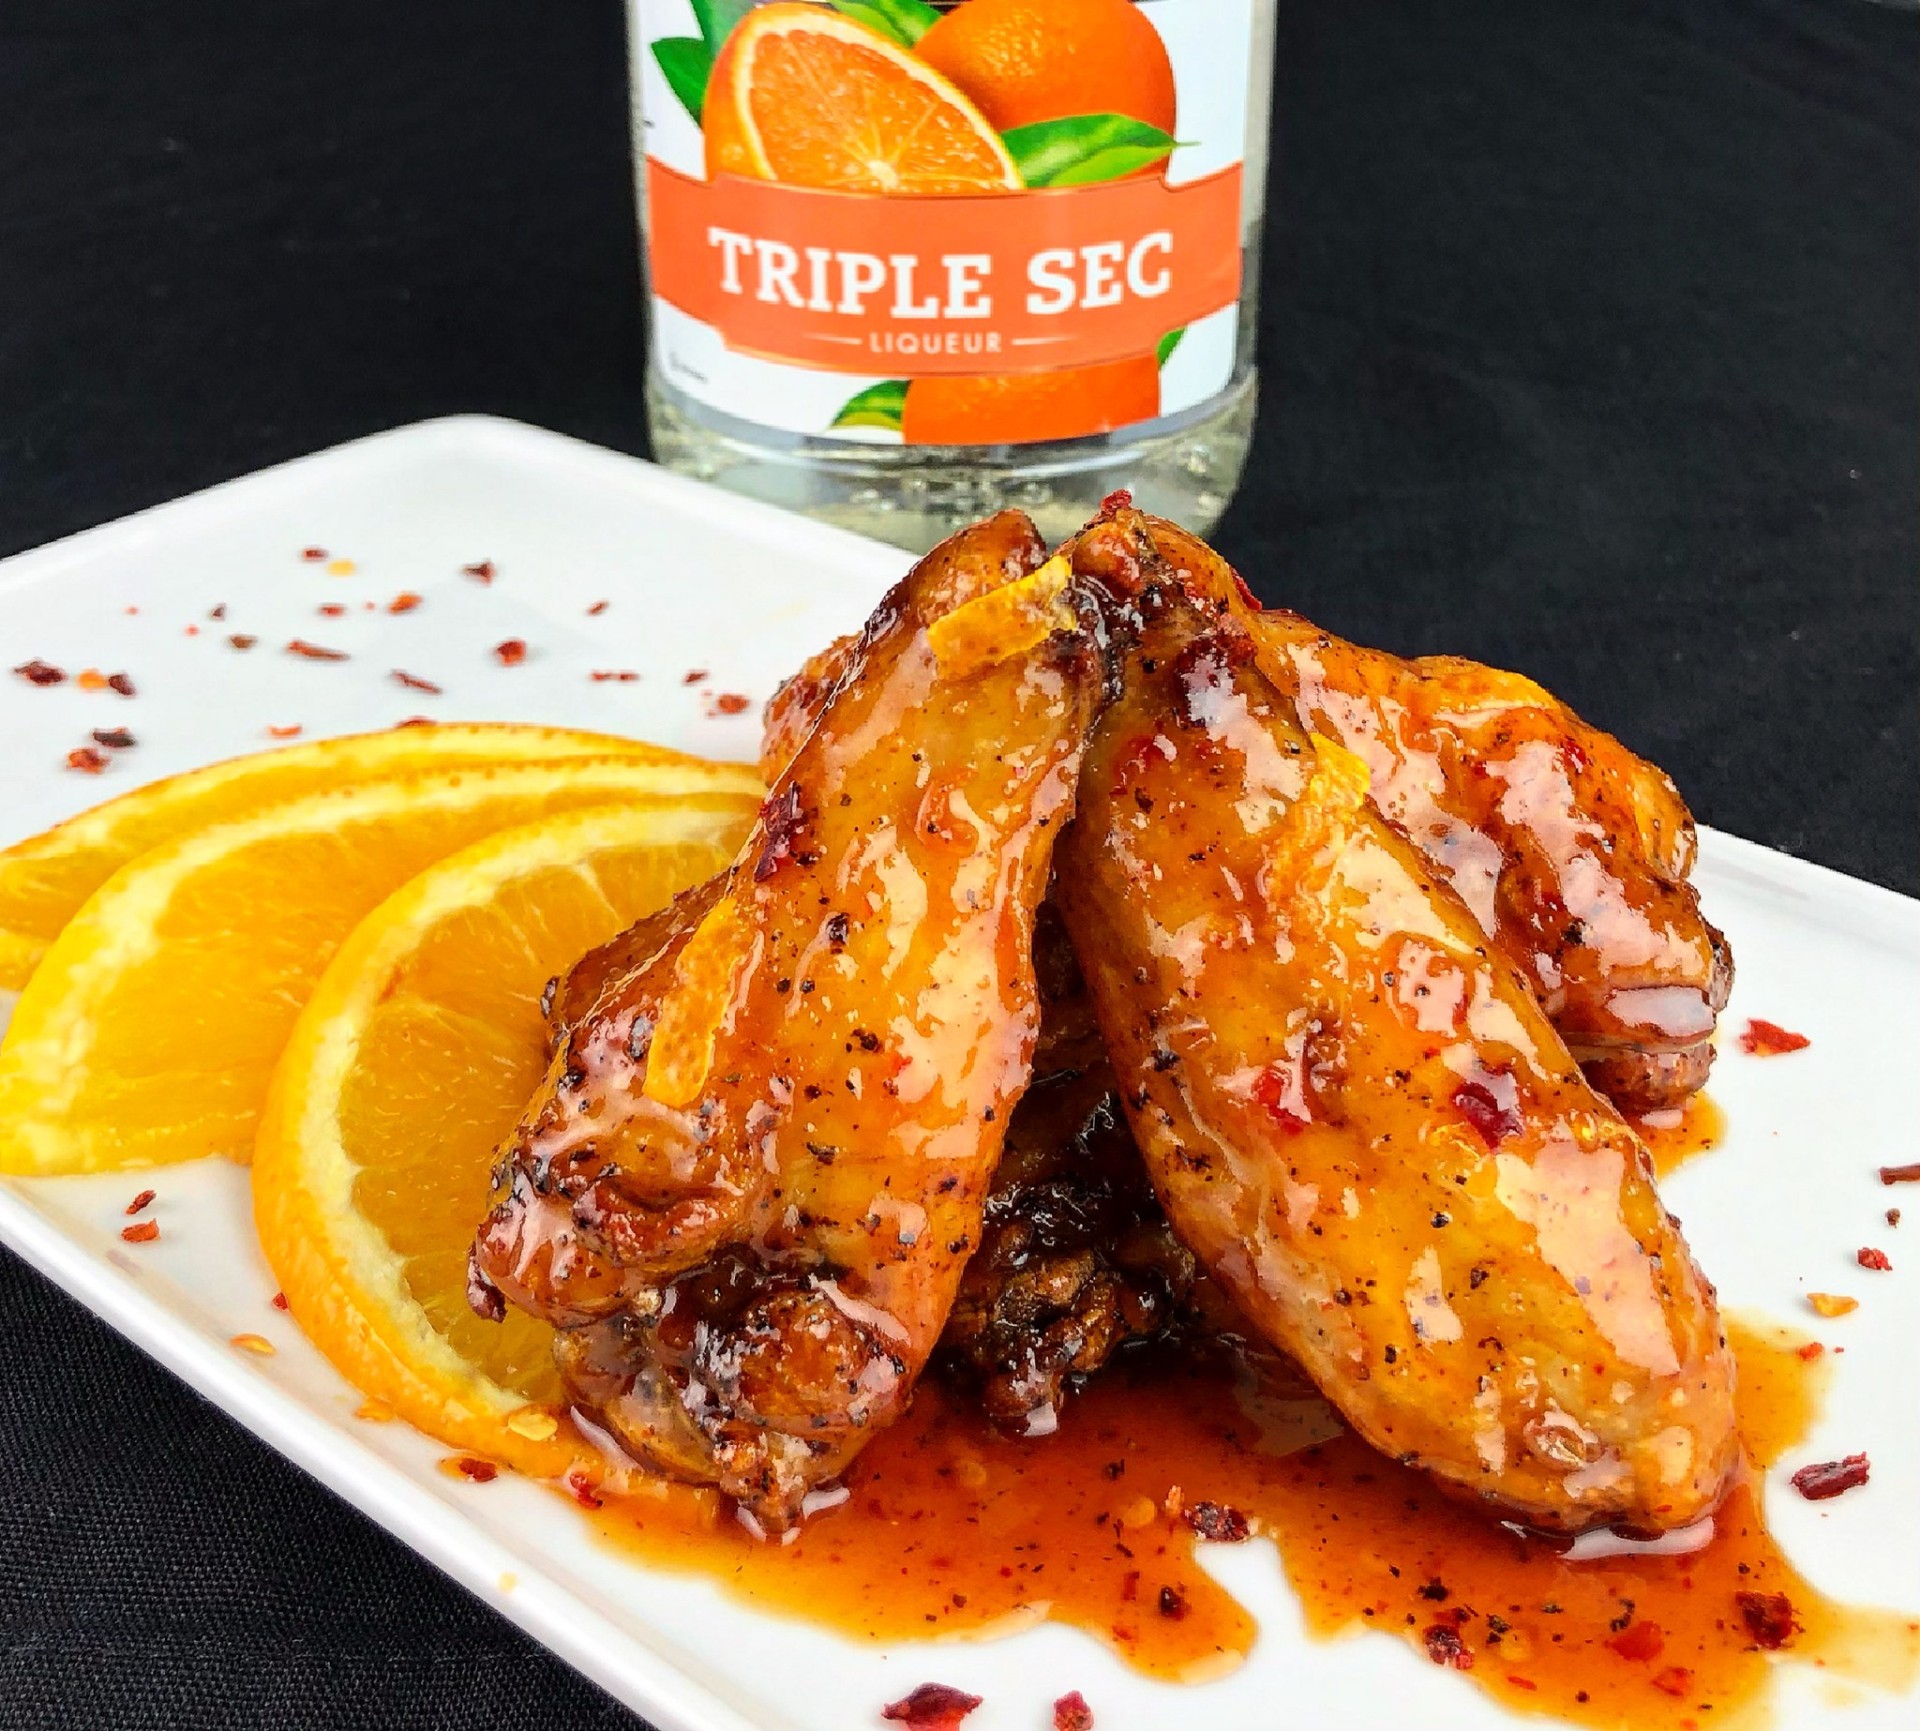 Get ready for orange soda Alcohol-infused restaurant mortar 614NOW and chicken – open wing to ghost brick planning hot wings: kitchen